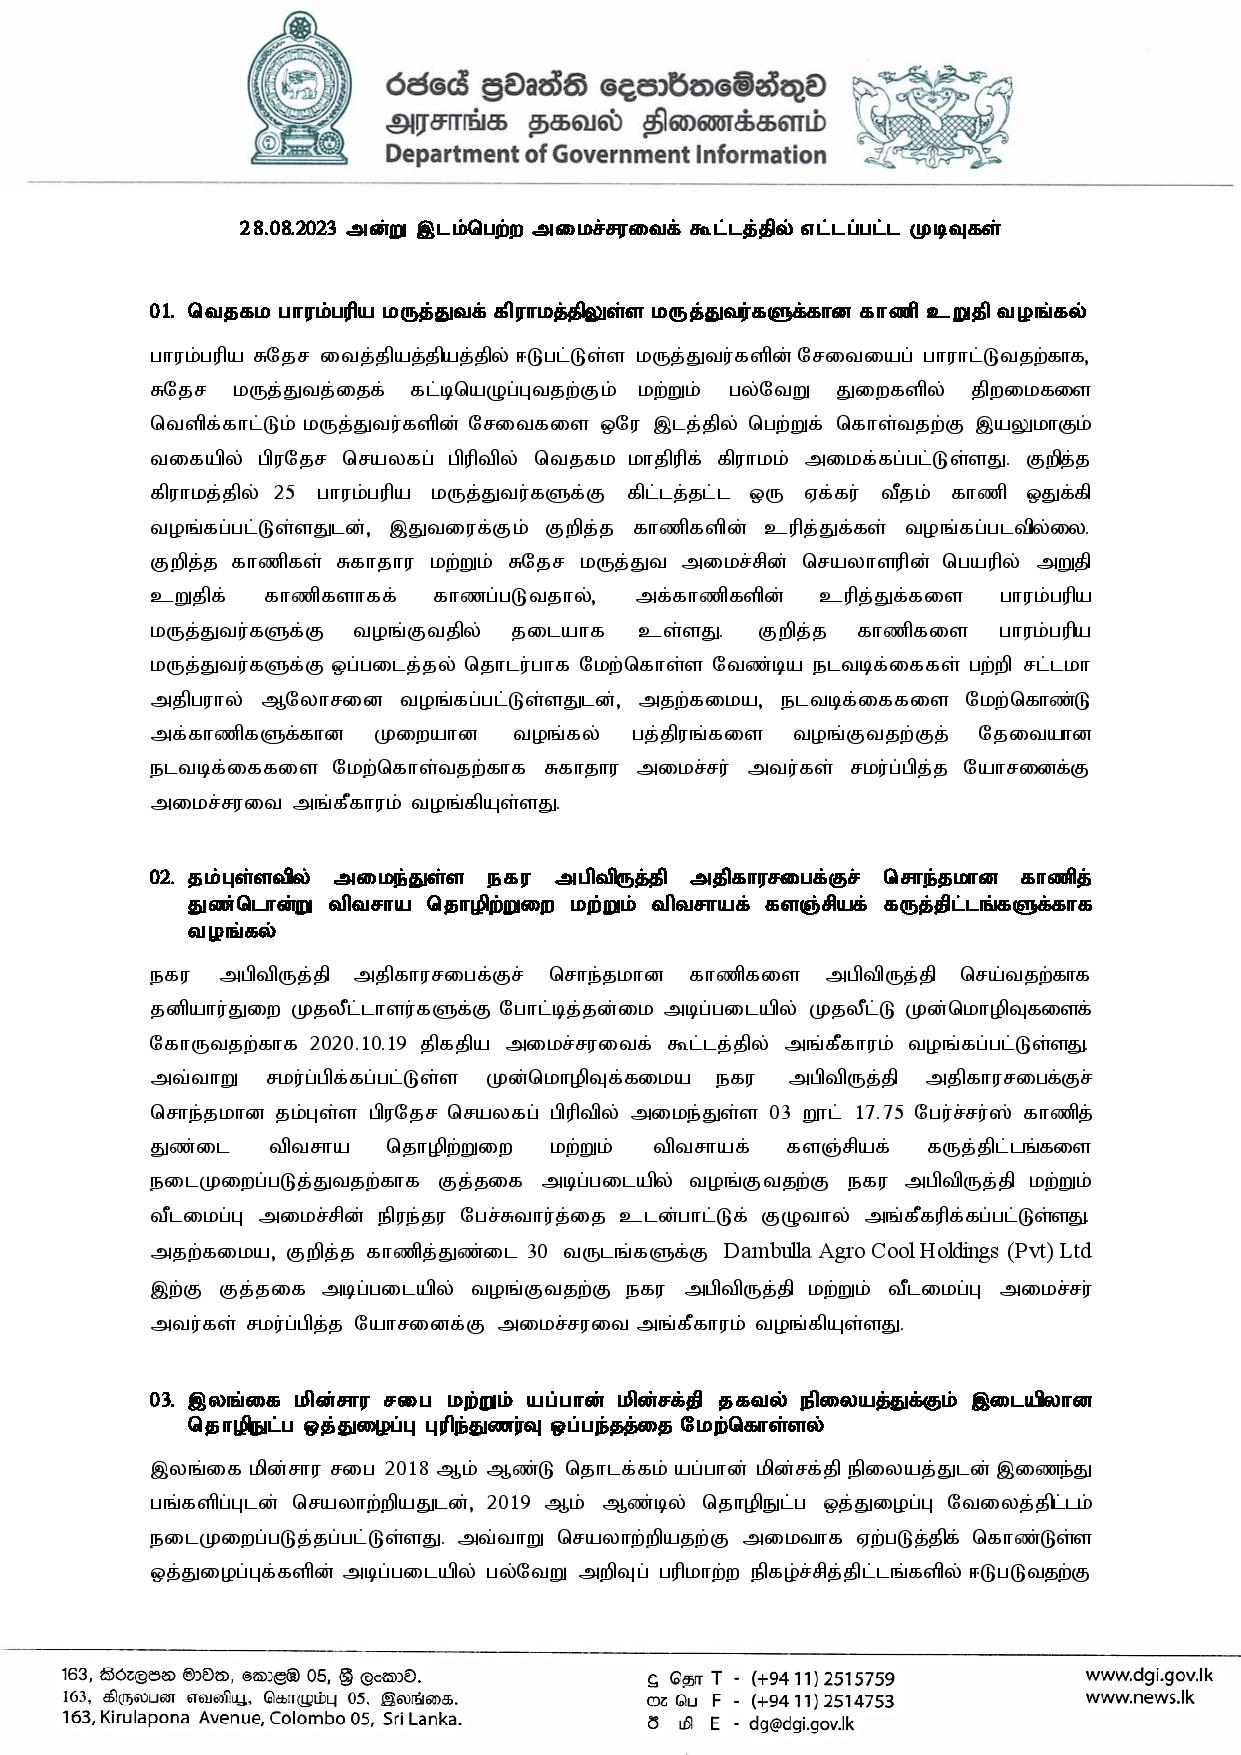 Cabinet Decision on 28.08.2023 Tamil page 001